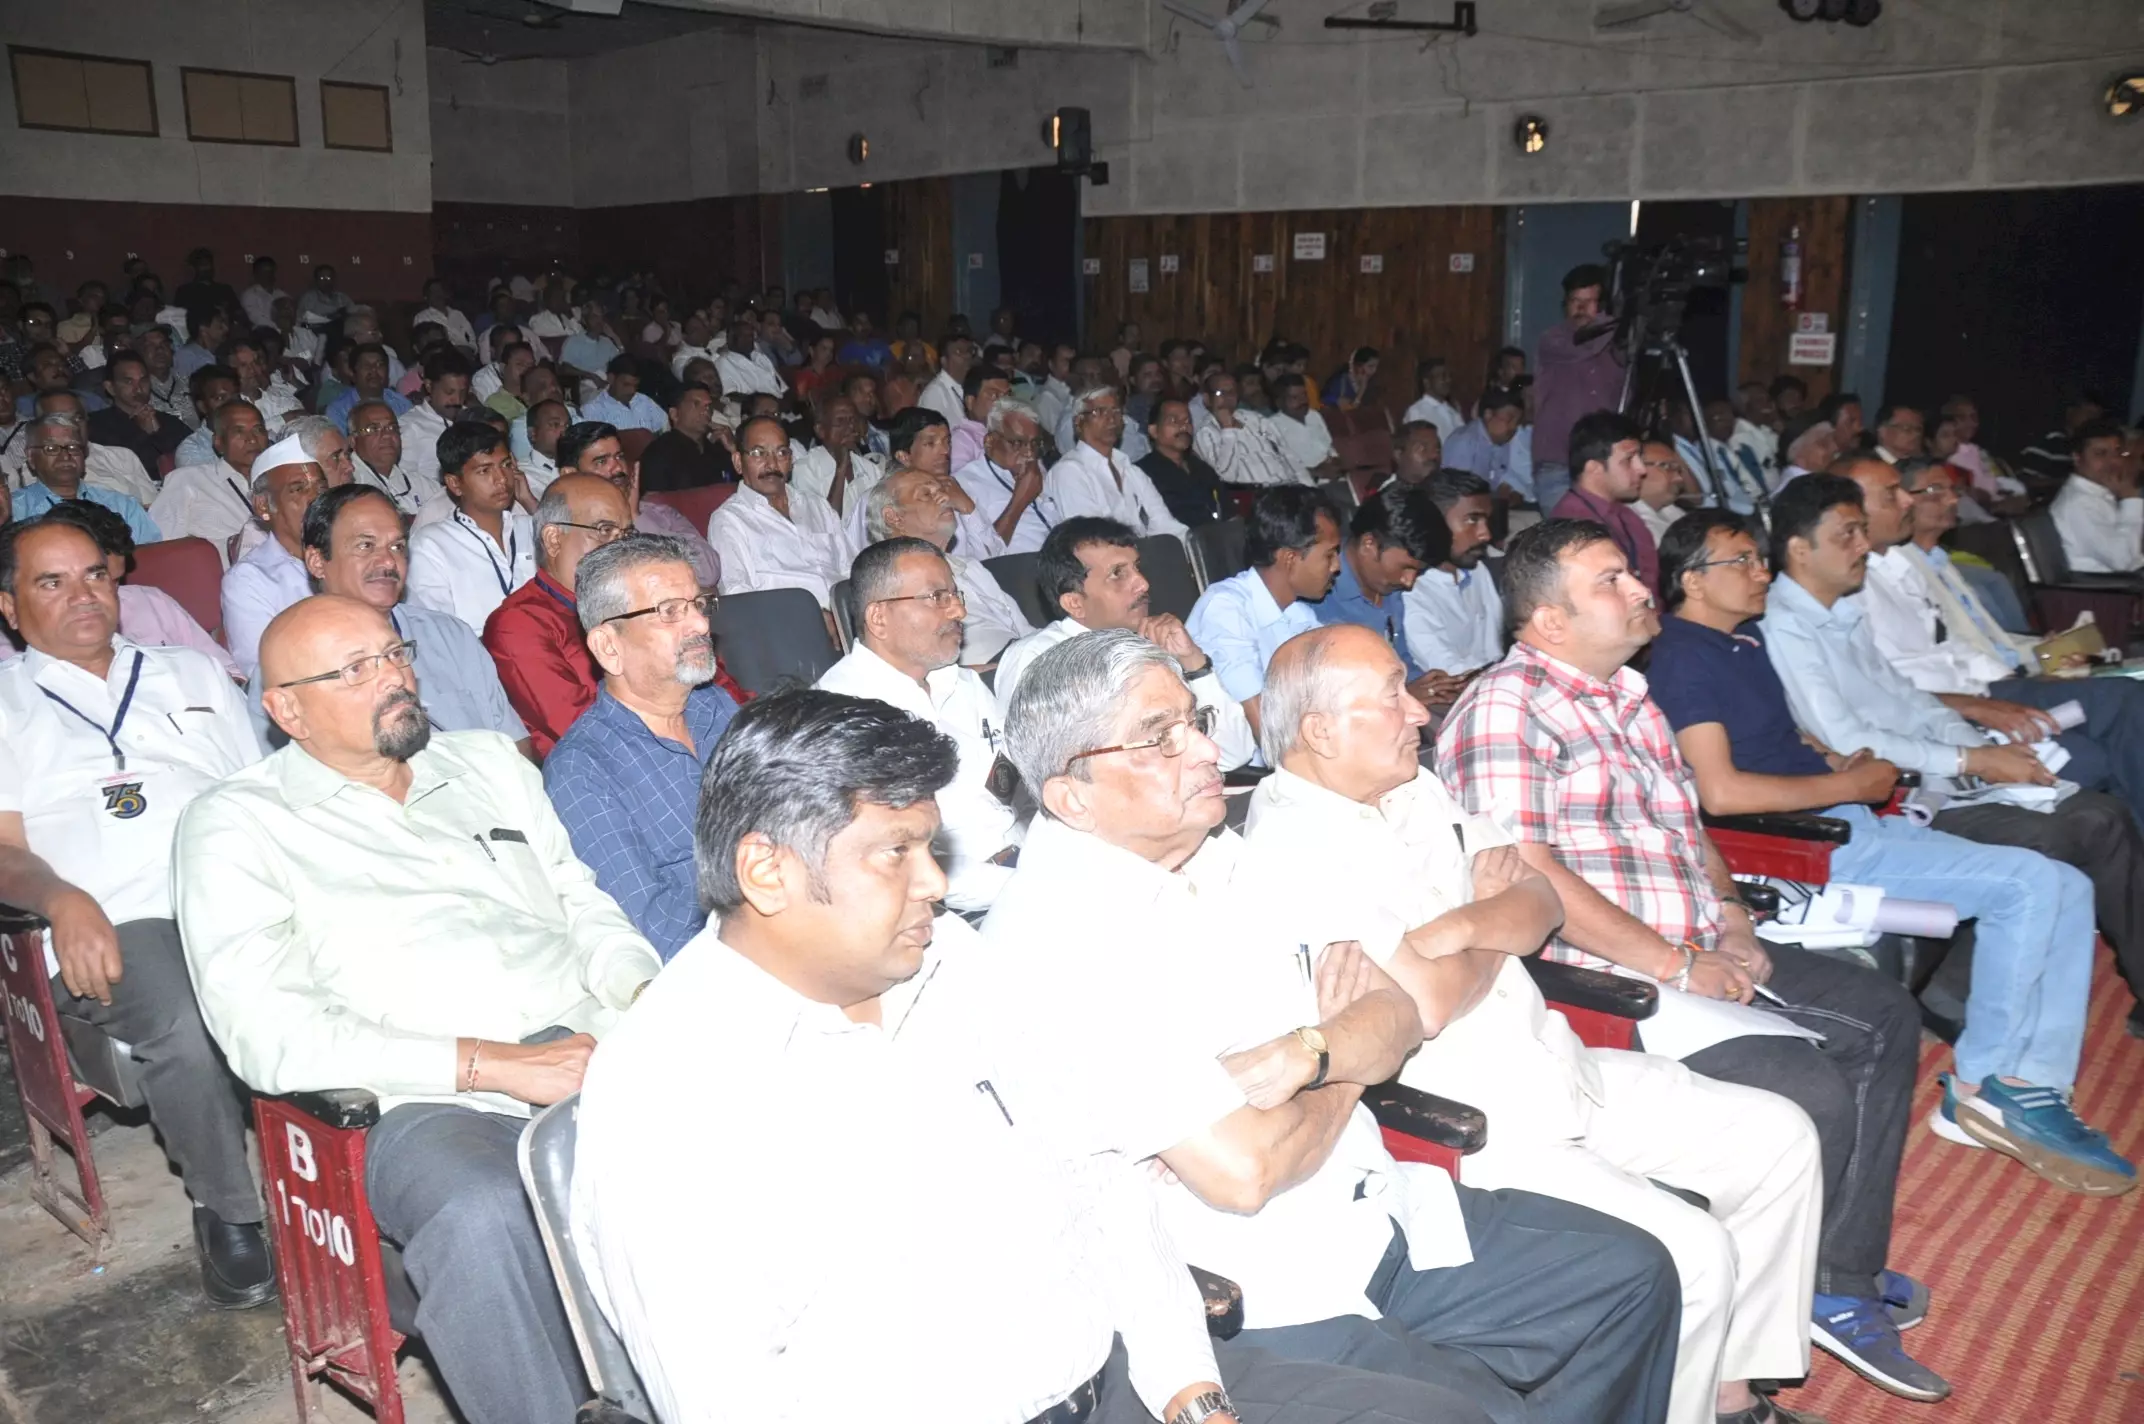 audience-more-tan-450-printers-from-belgaum-in-attendance